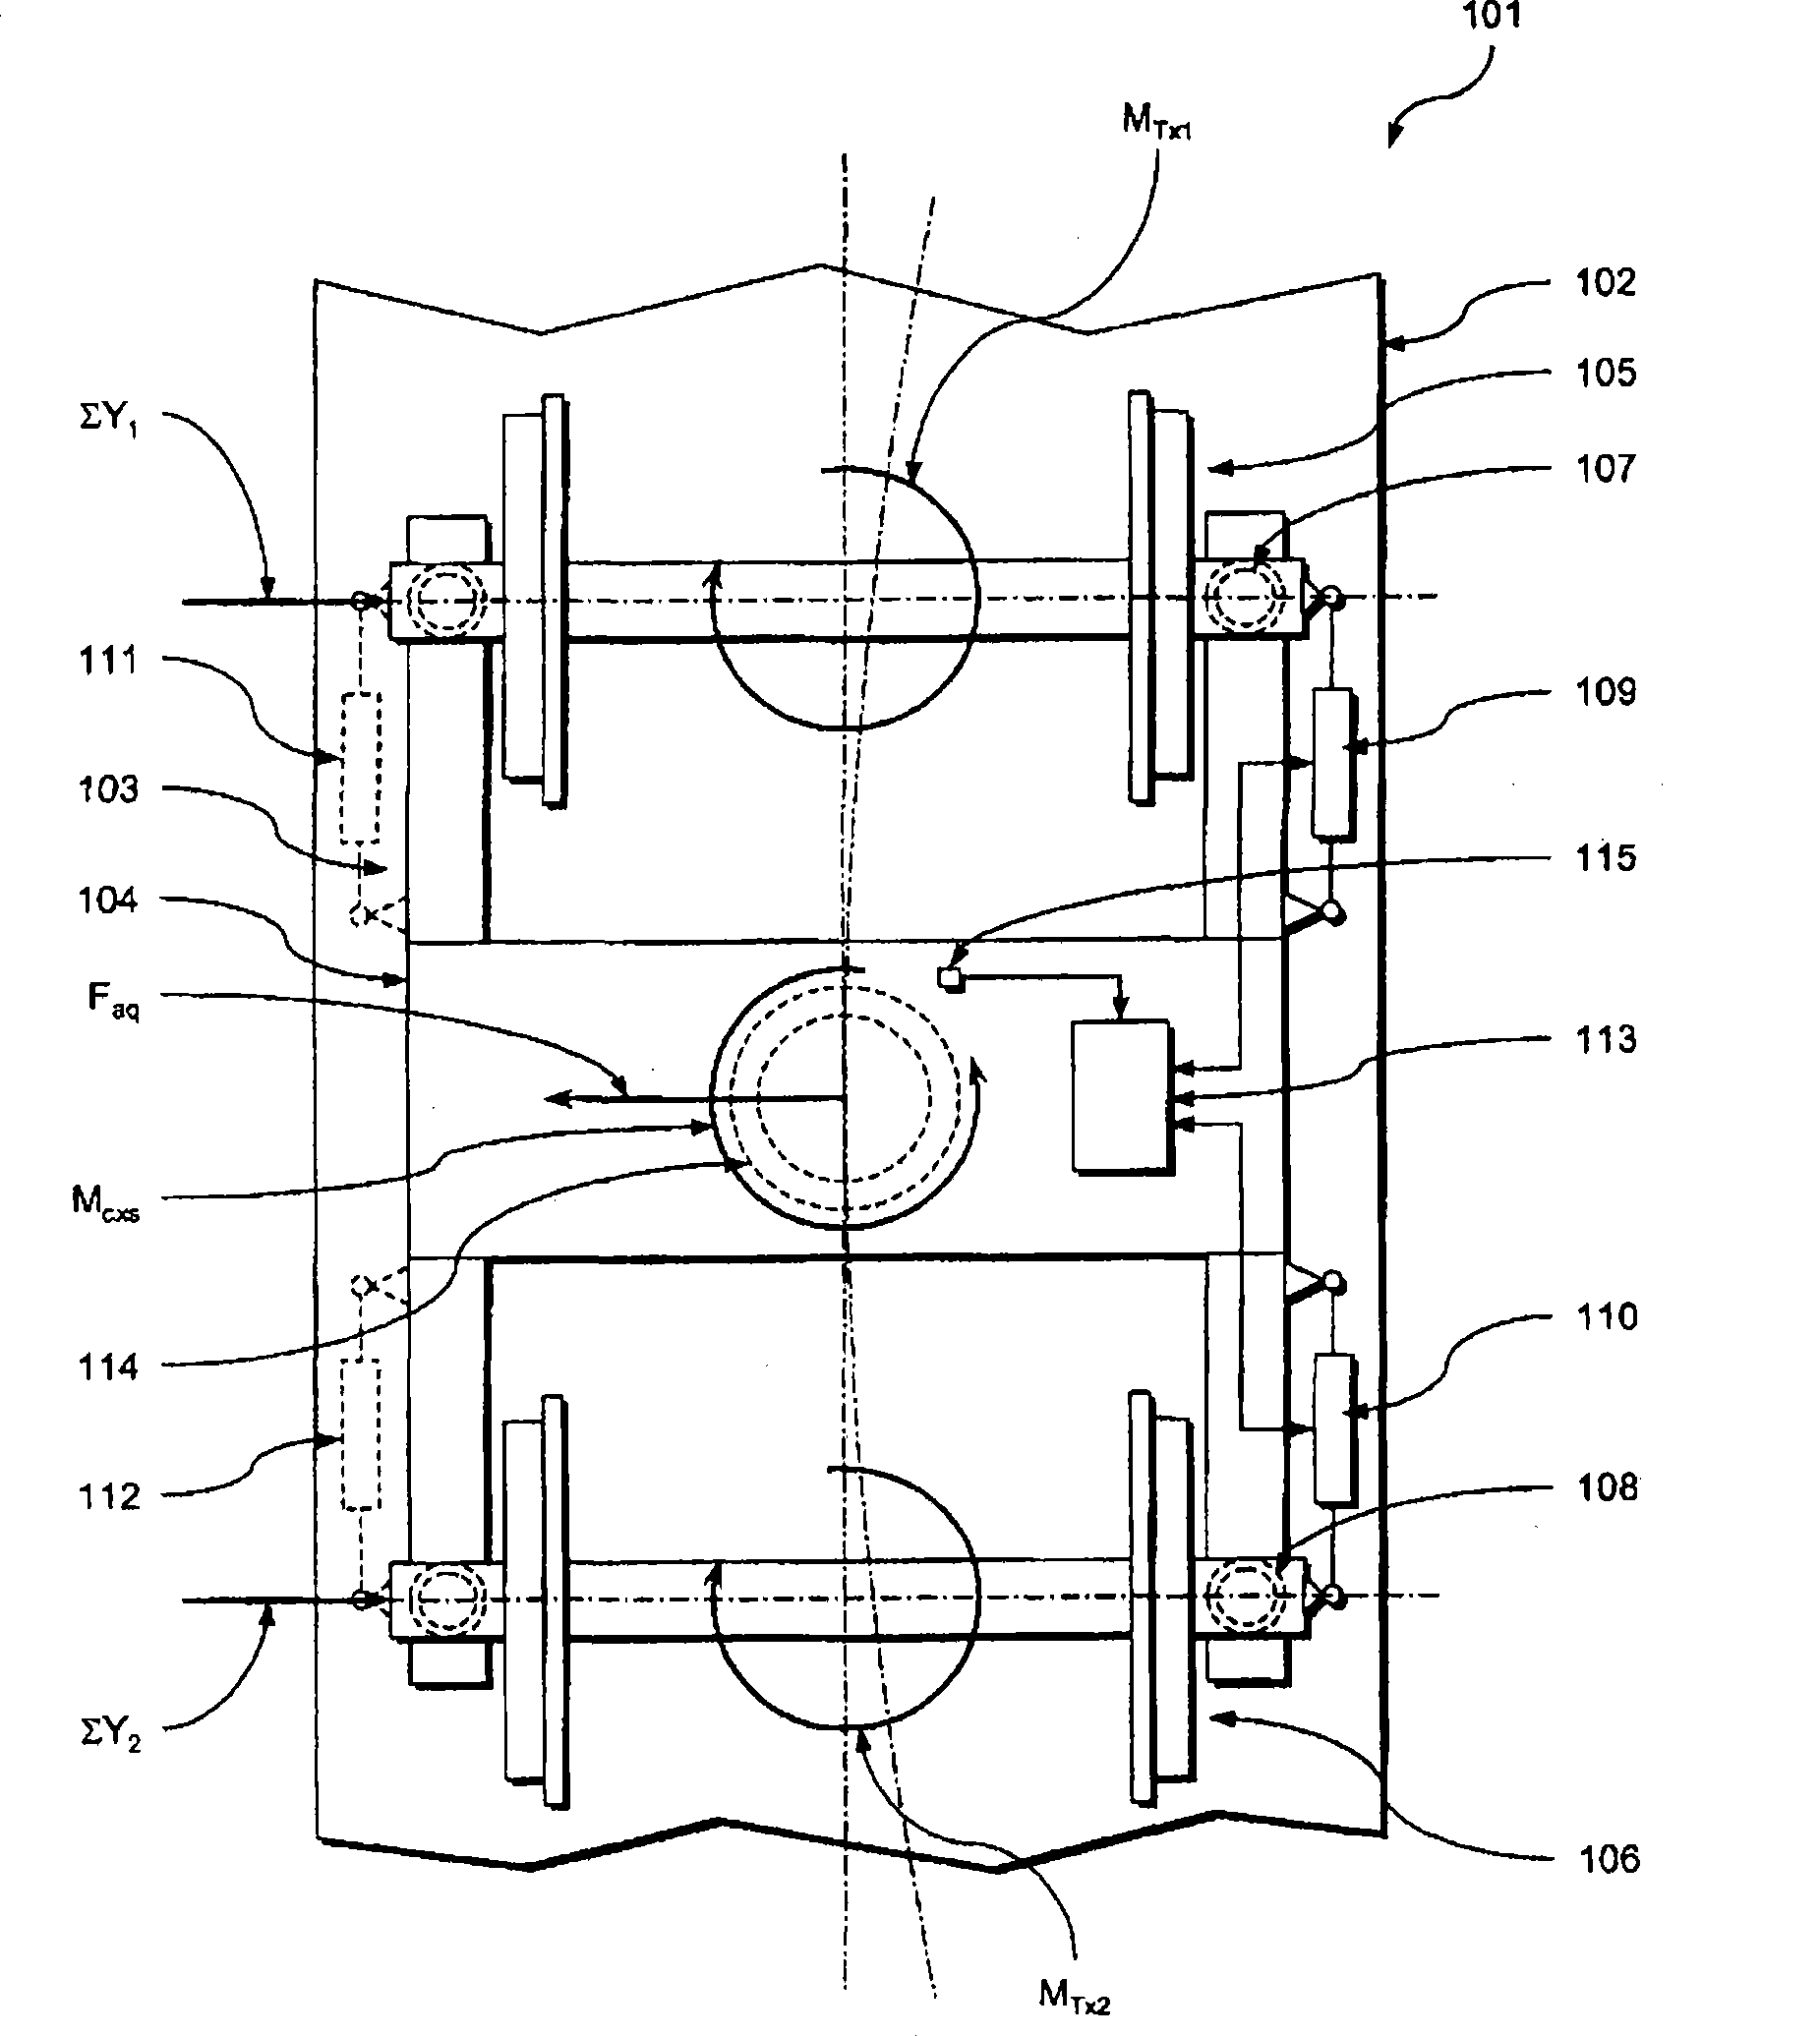 Method for regulating an active chassis of a tracked vehicle